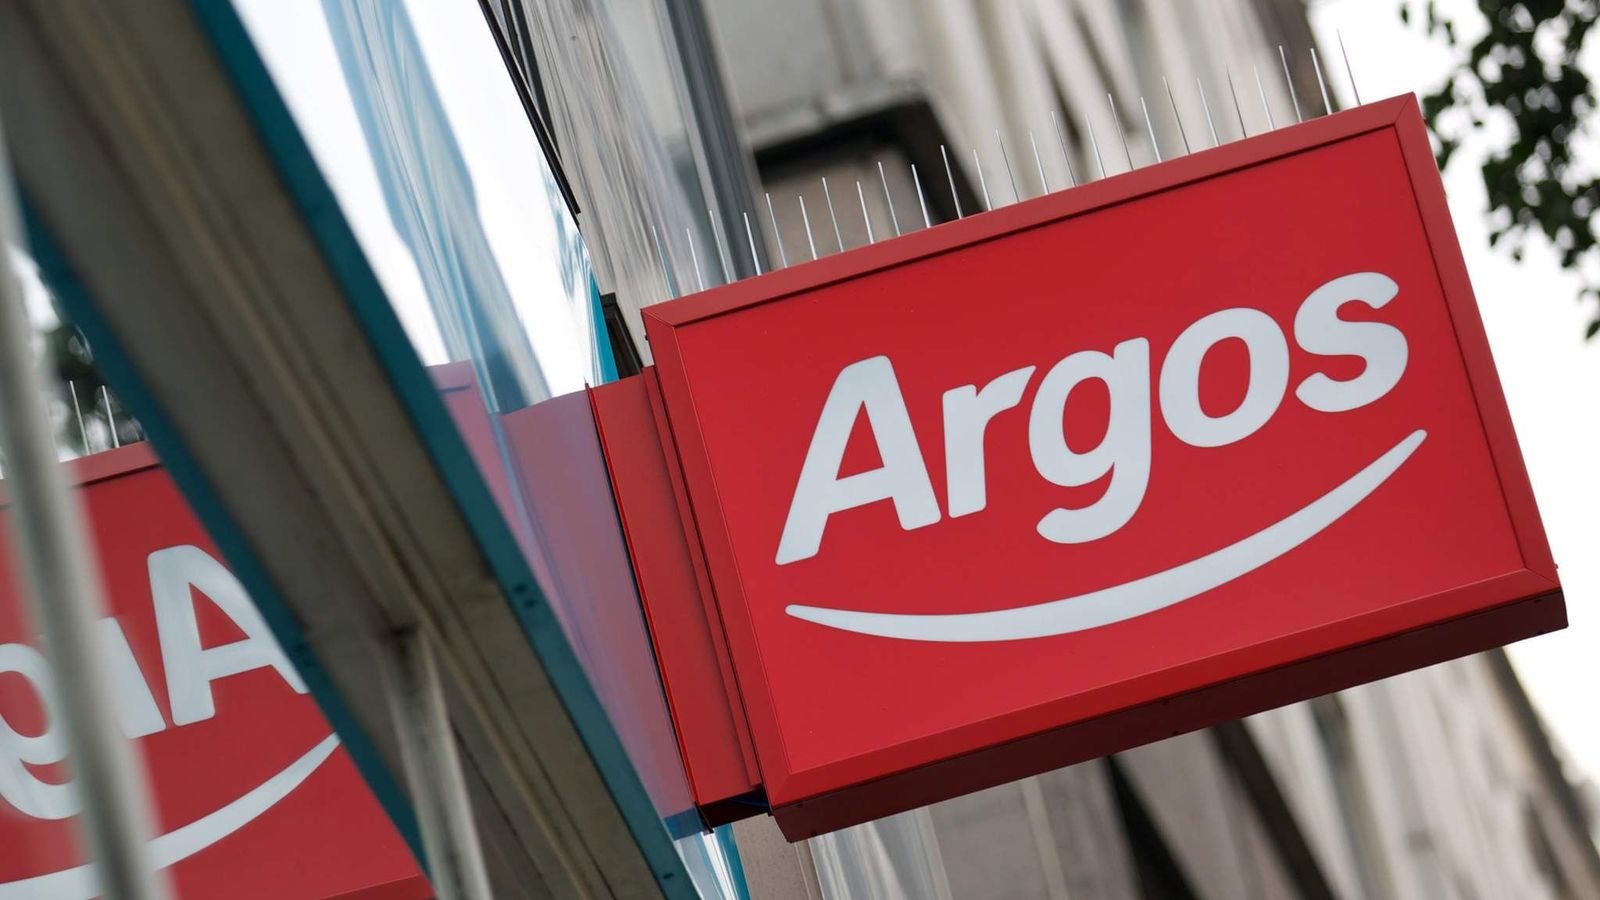 Argos closes all stores in Ireland, with nearly 600 jobs lost